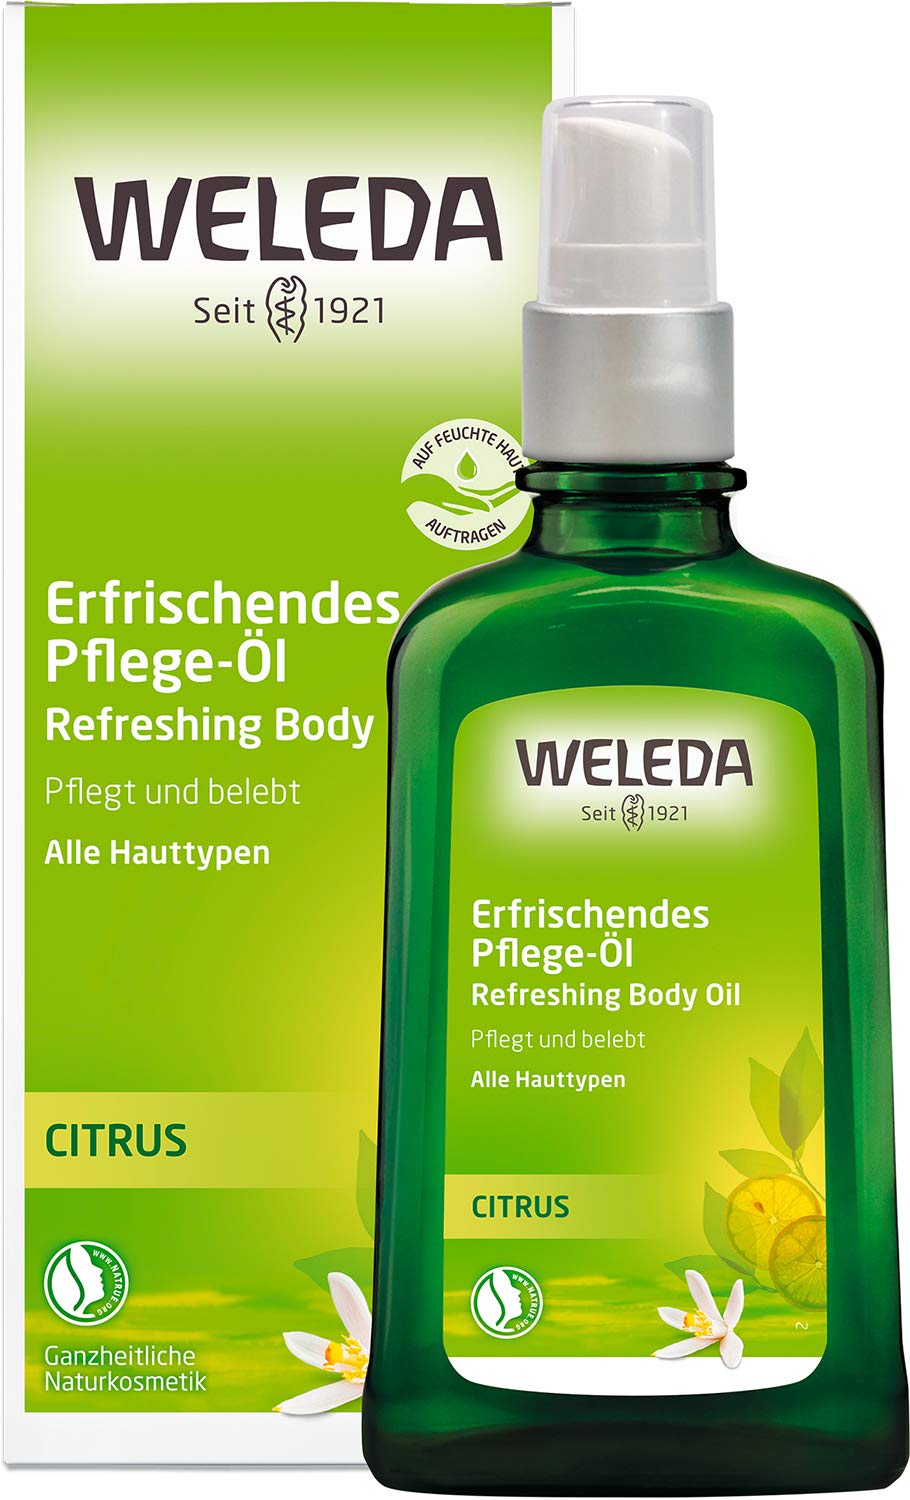 WELEDA Organic Citrus Refreshing Care Oil, Invigorating and Refreshing Natural Cosmetics Body Oil for Care and Protection Against Dry Skin, Citrus Body Oil with Fresh Fragrance (1 x 100 ml)